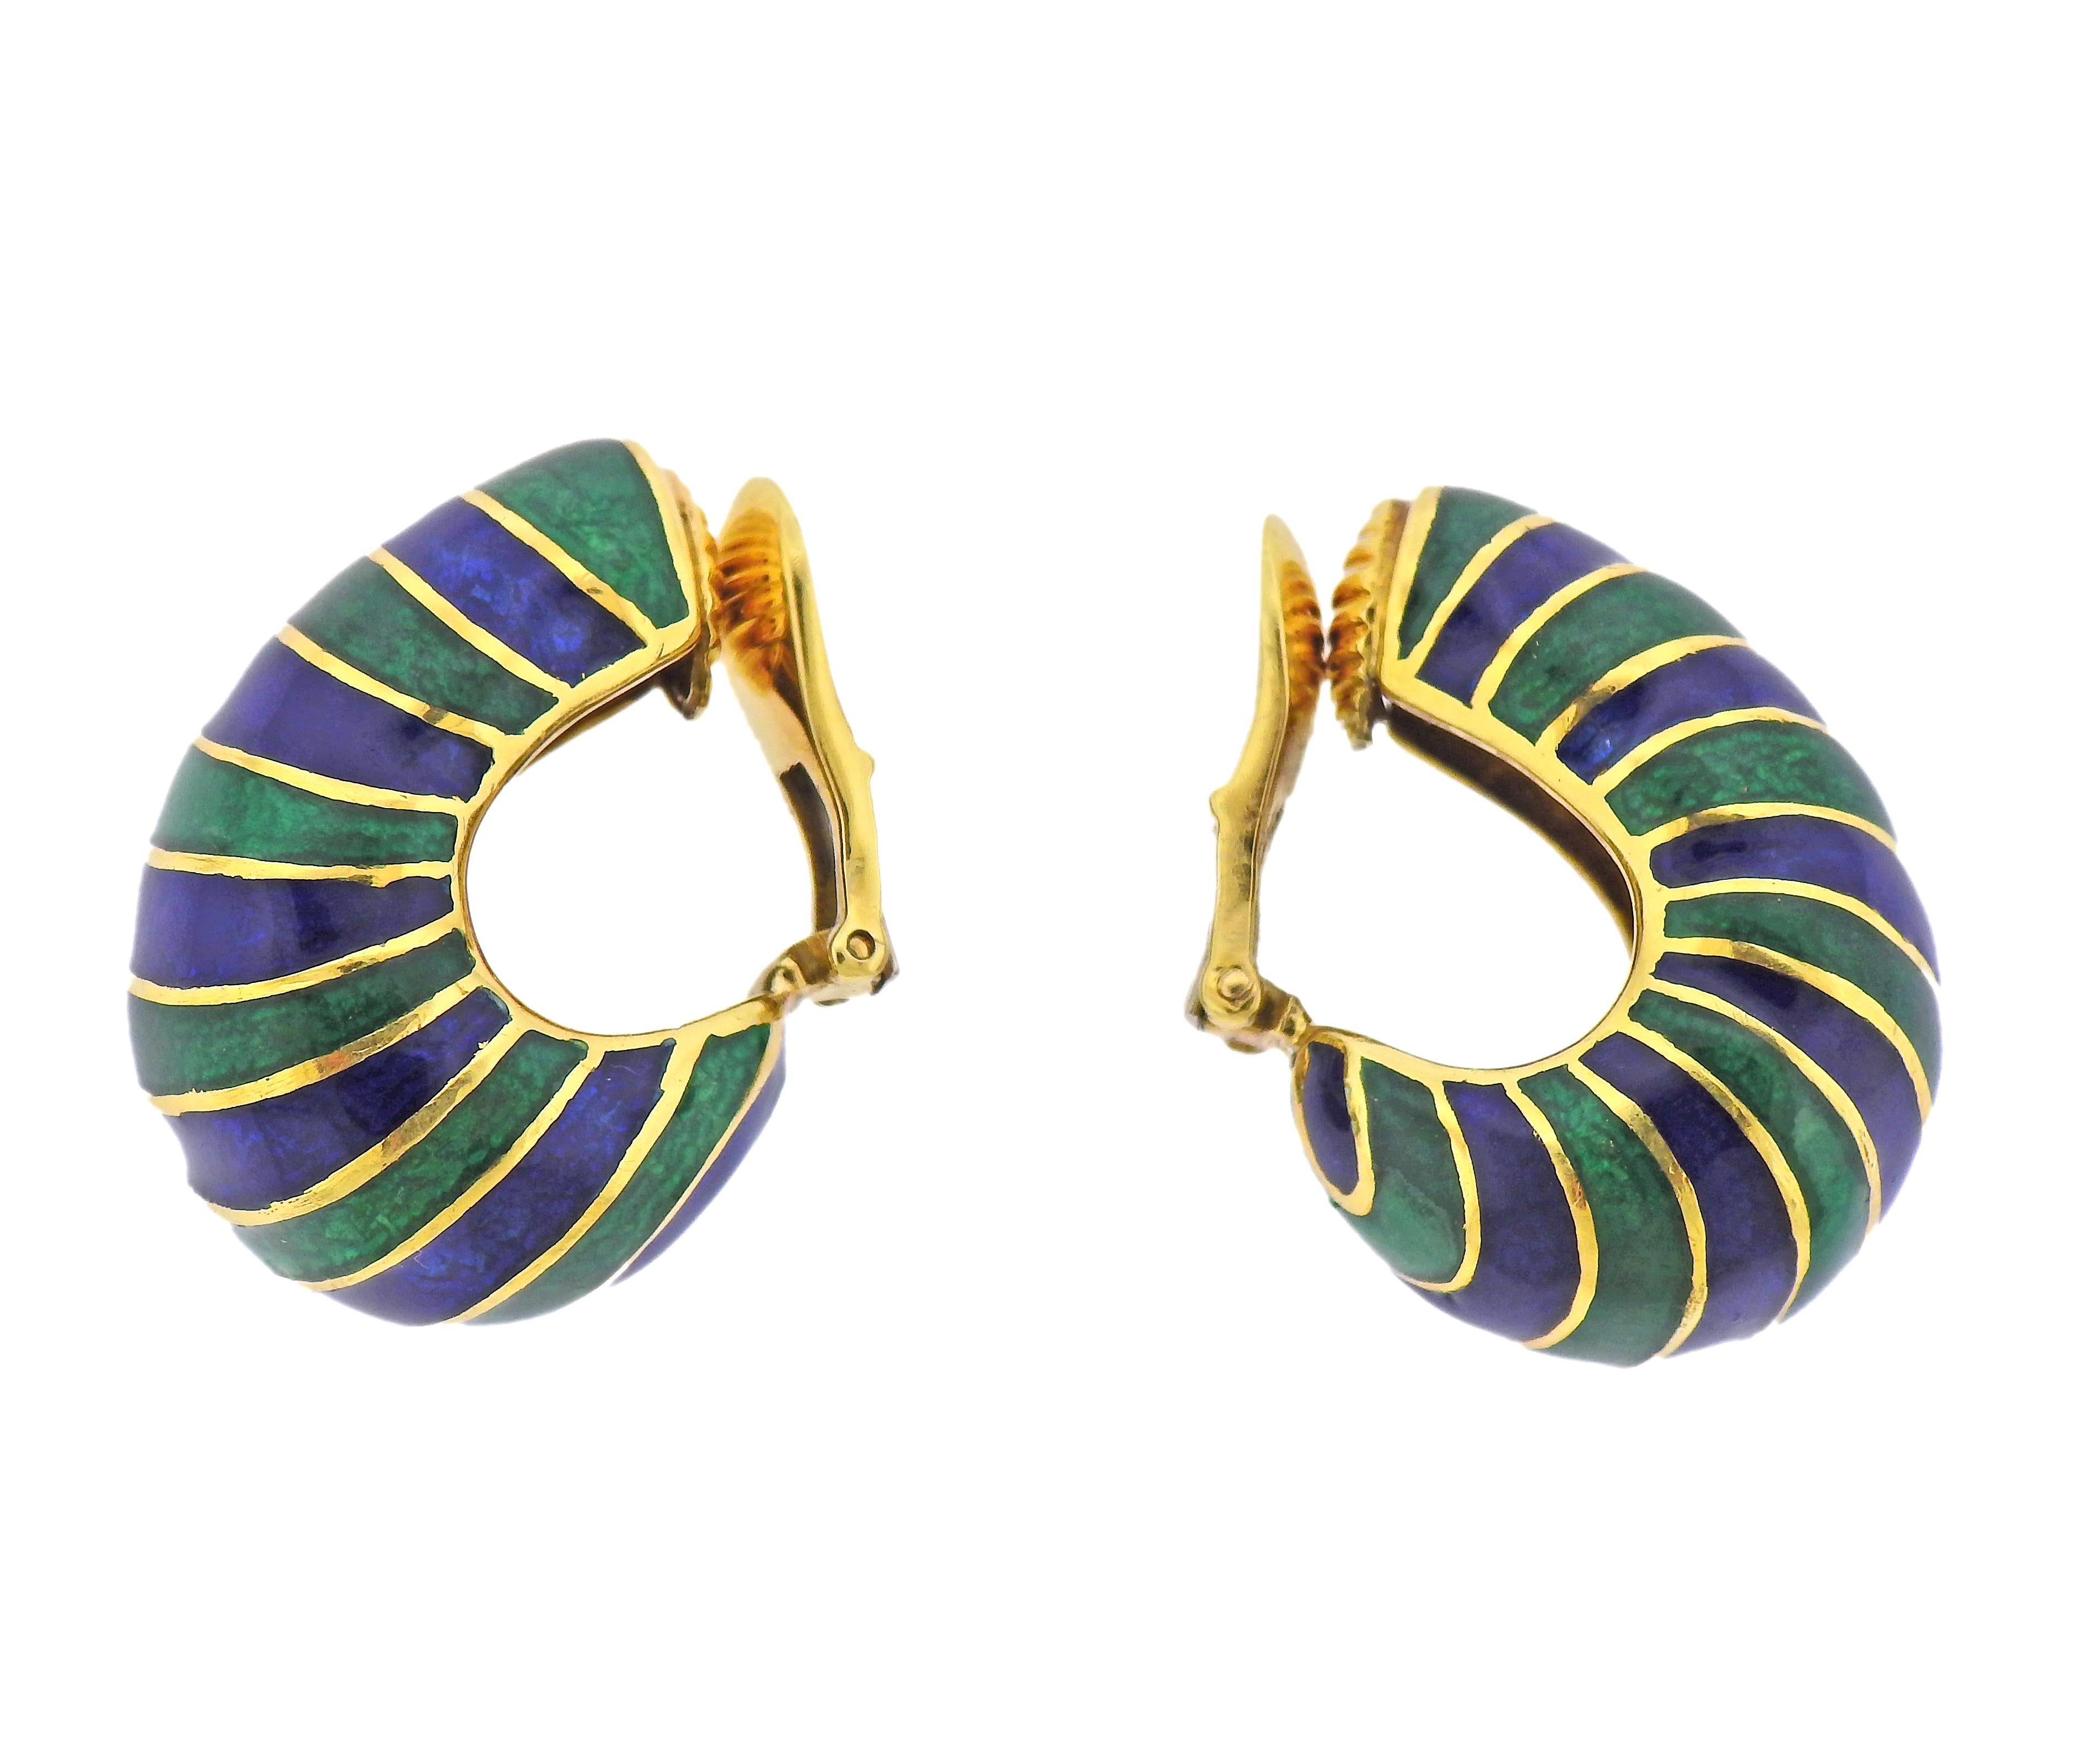 Pair of 18k gold half hoop earrings by David Webb, decorated with blue and green enamel stripes. Earrings are 30mm x 15mm. Marked: Webb, 18k, GA31. Weight - 33.4 grams. 